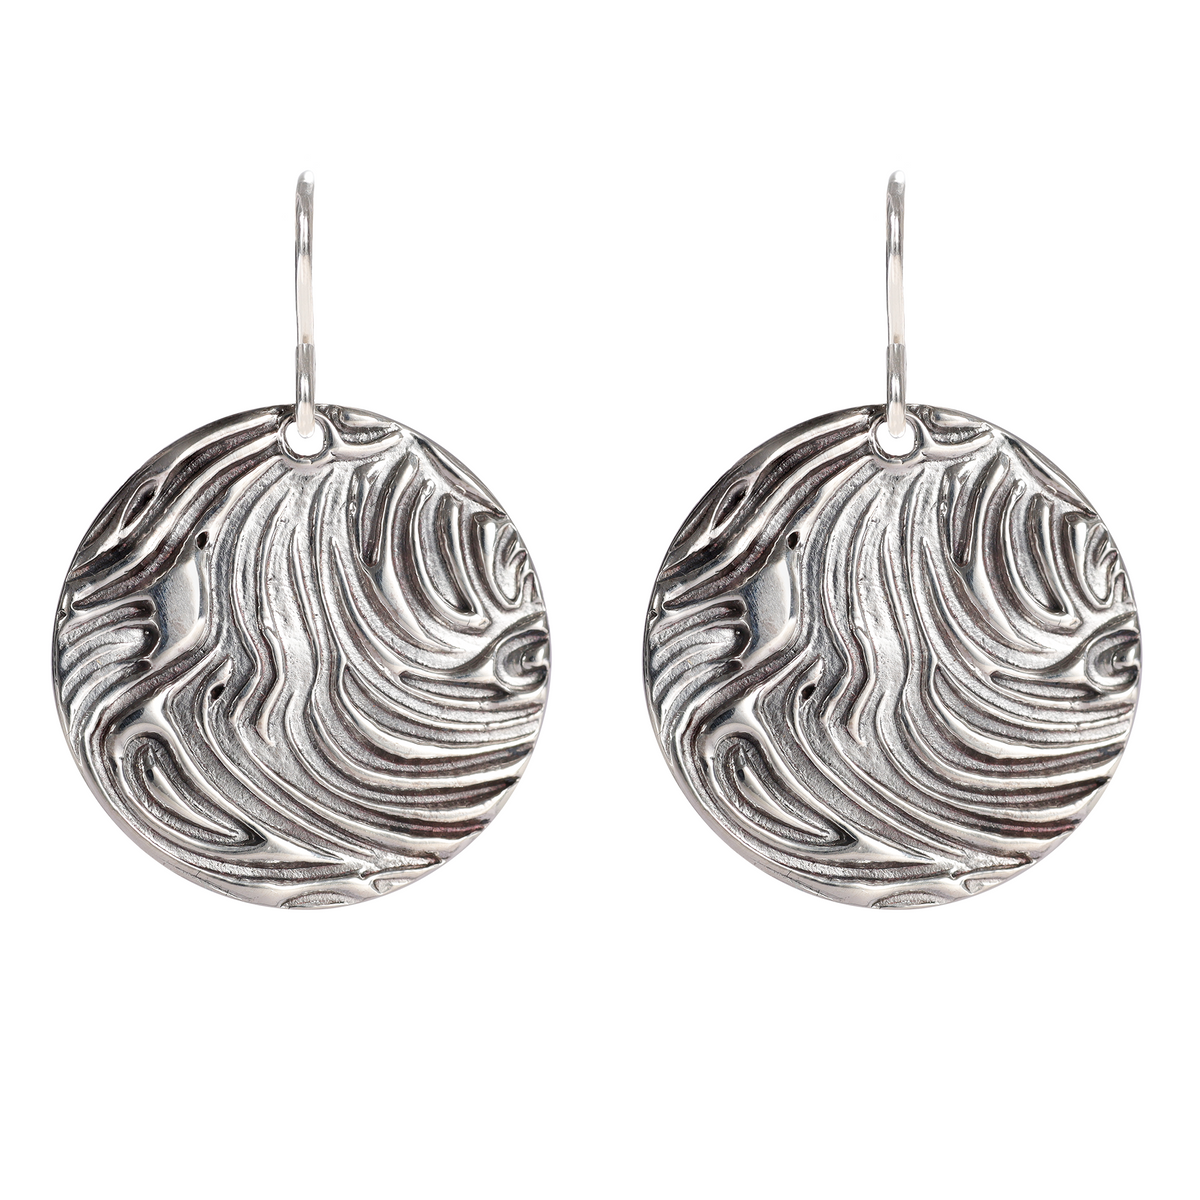 Wind Textured Large Sterling Silver Earrings on Short Ear Wires